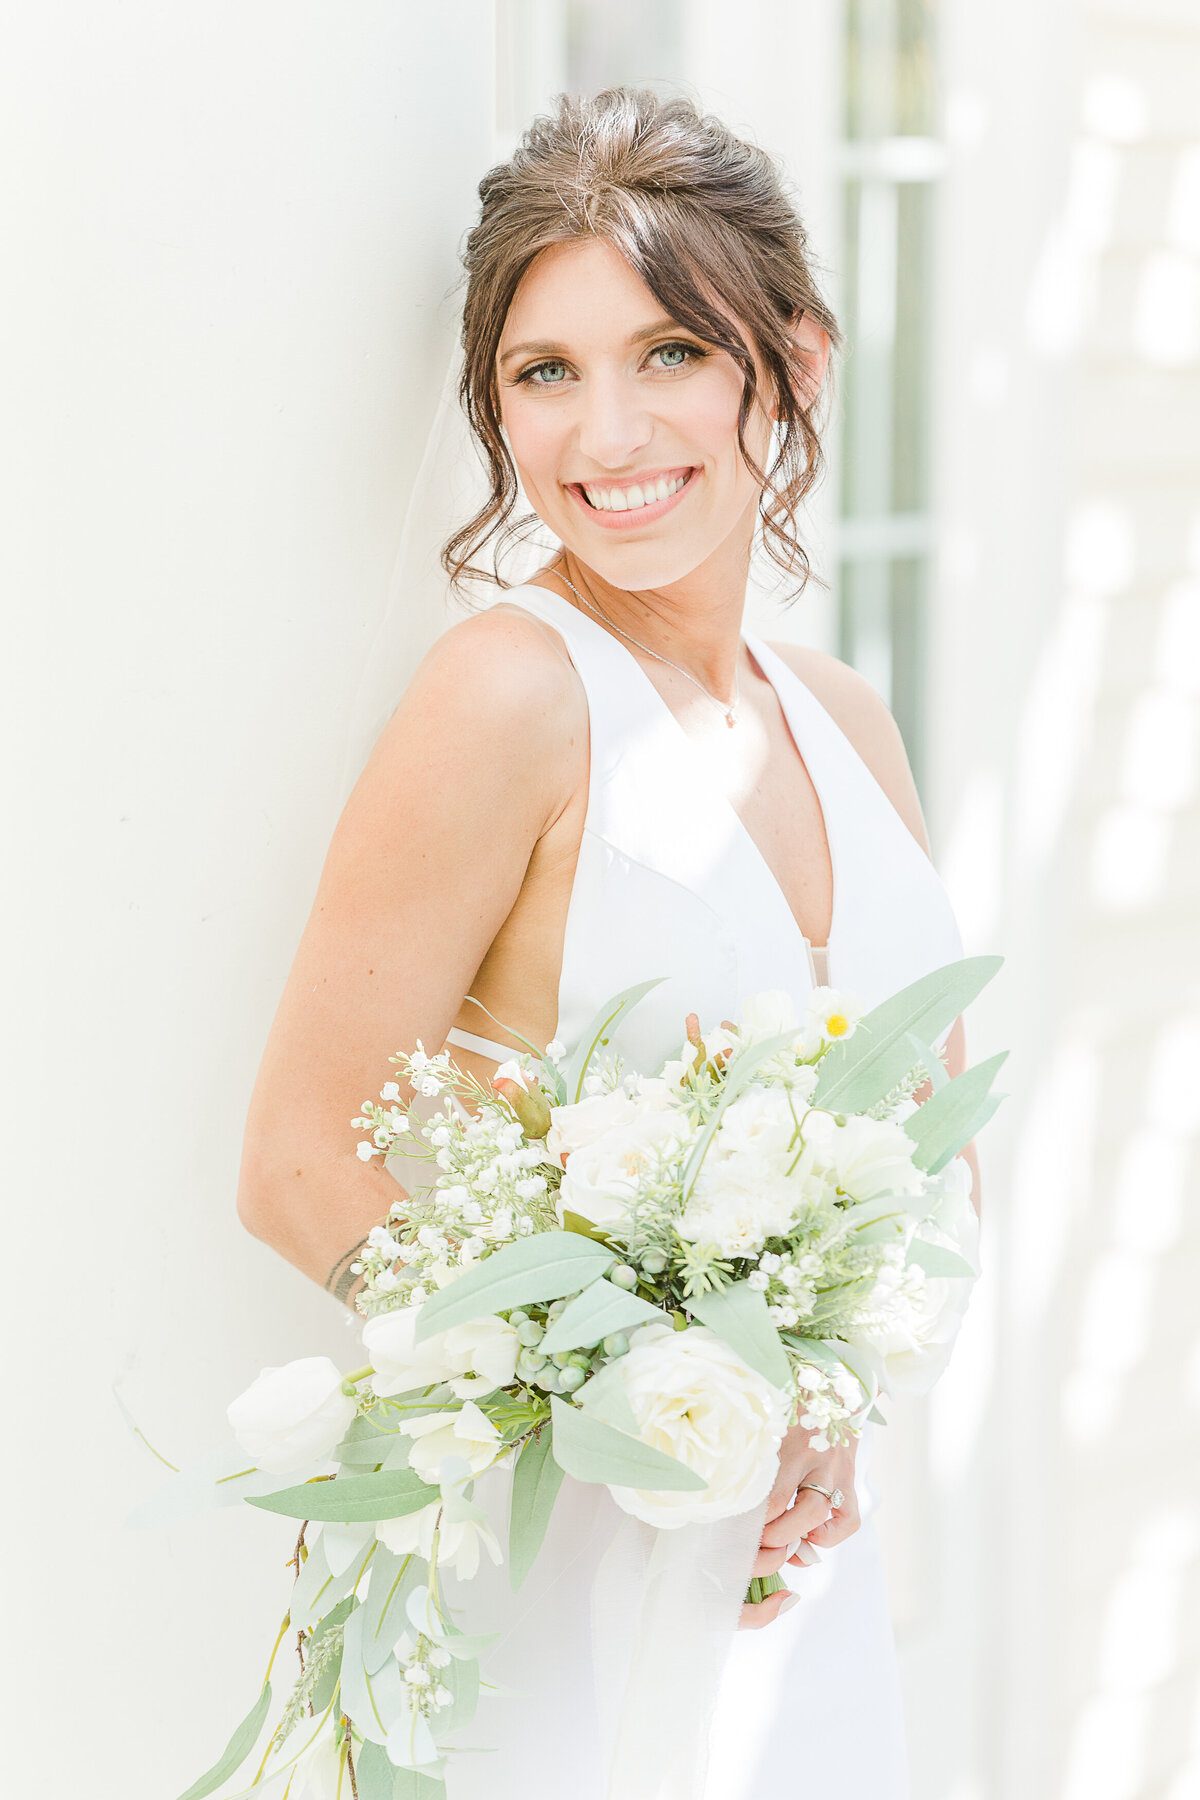 A stunning formal bridal portrait. The bride is standing angled to the camera, looking over her shoulder and smiling. She is casually holding her bouquet in front of her. Captured by best Rhode Island editorial wedding photographer Lia Rose Weddings.